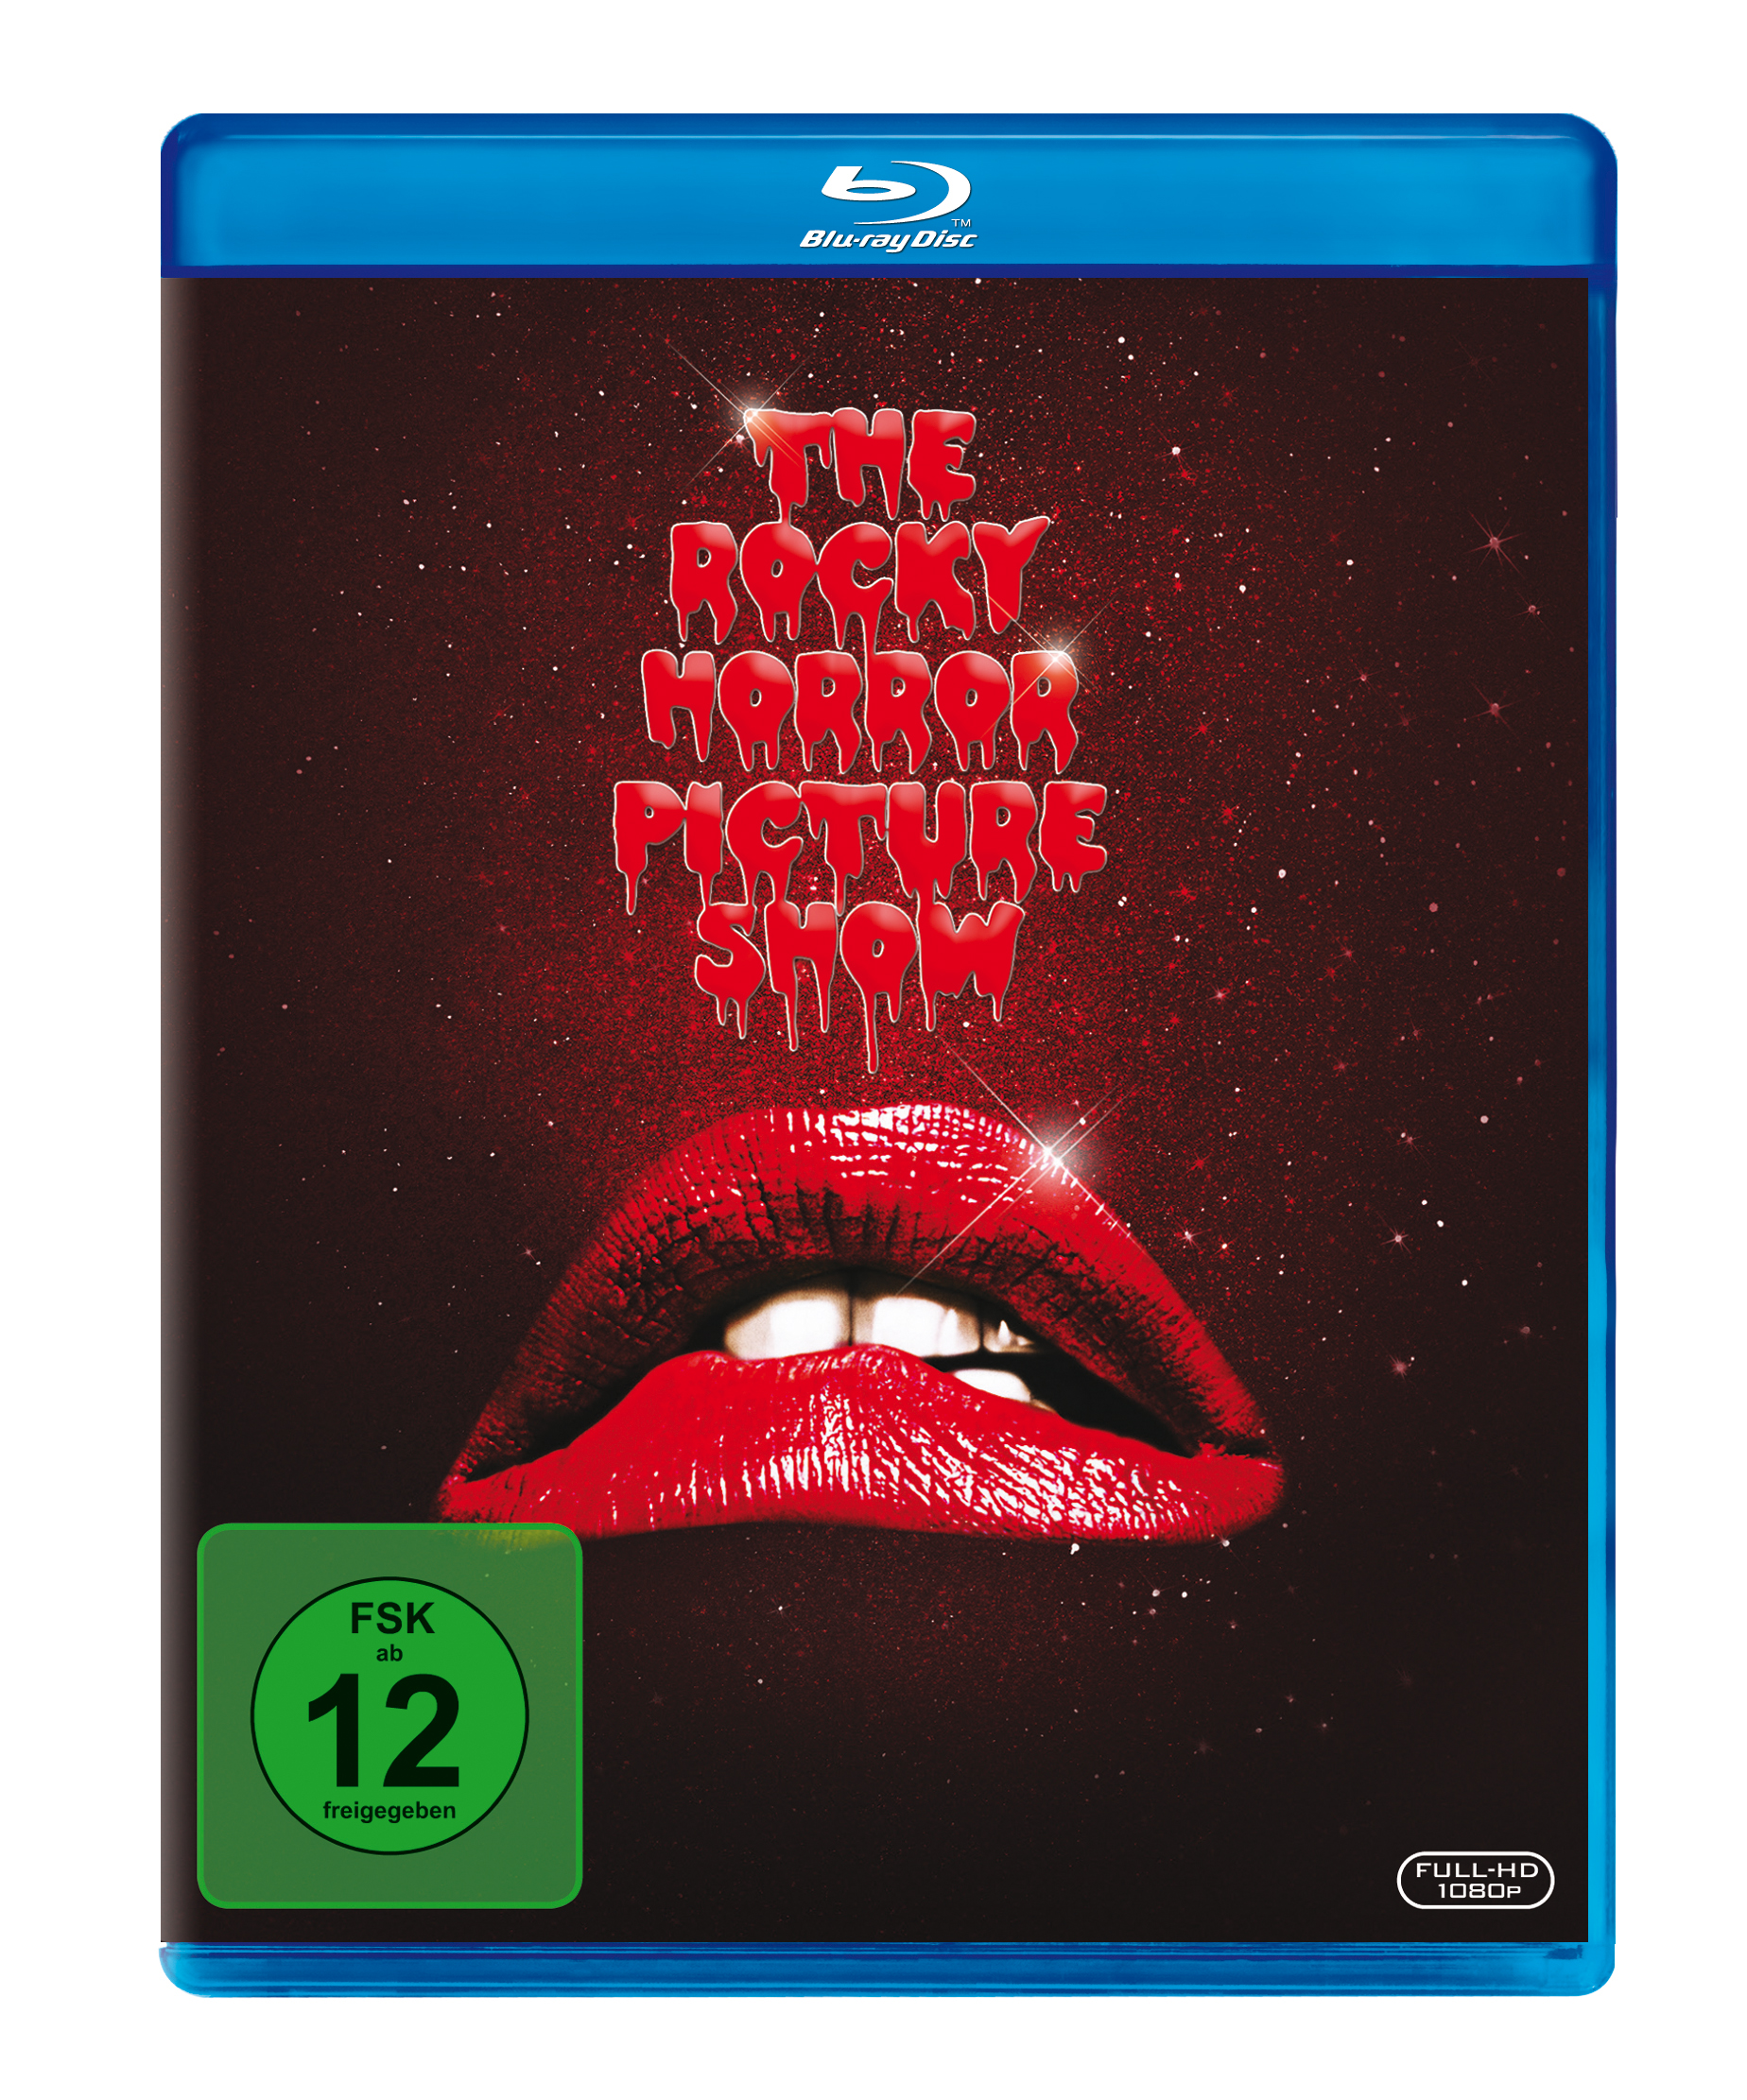 The Rocky Horror Picture Show Blu-ray